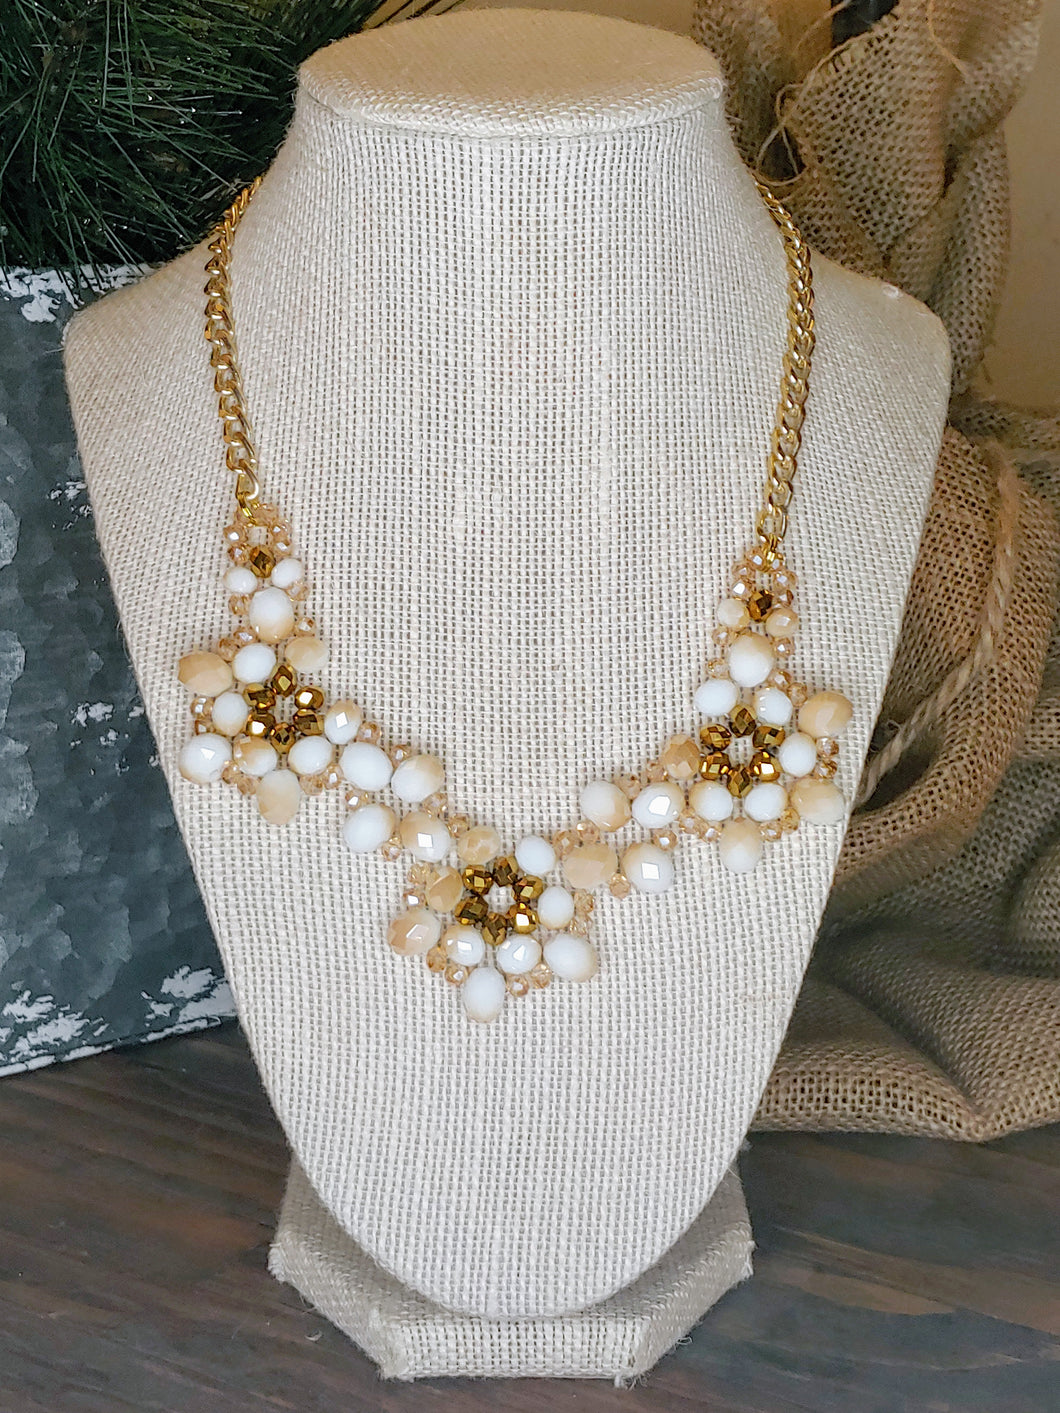 Vintage Style Beaded Necklace & Earrings set